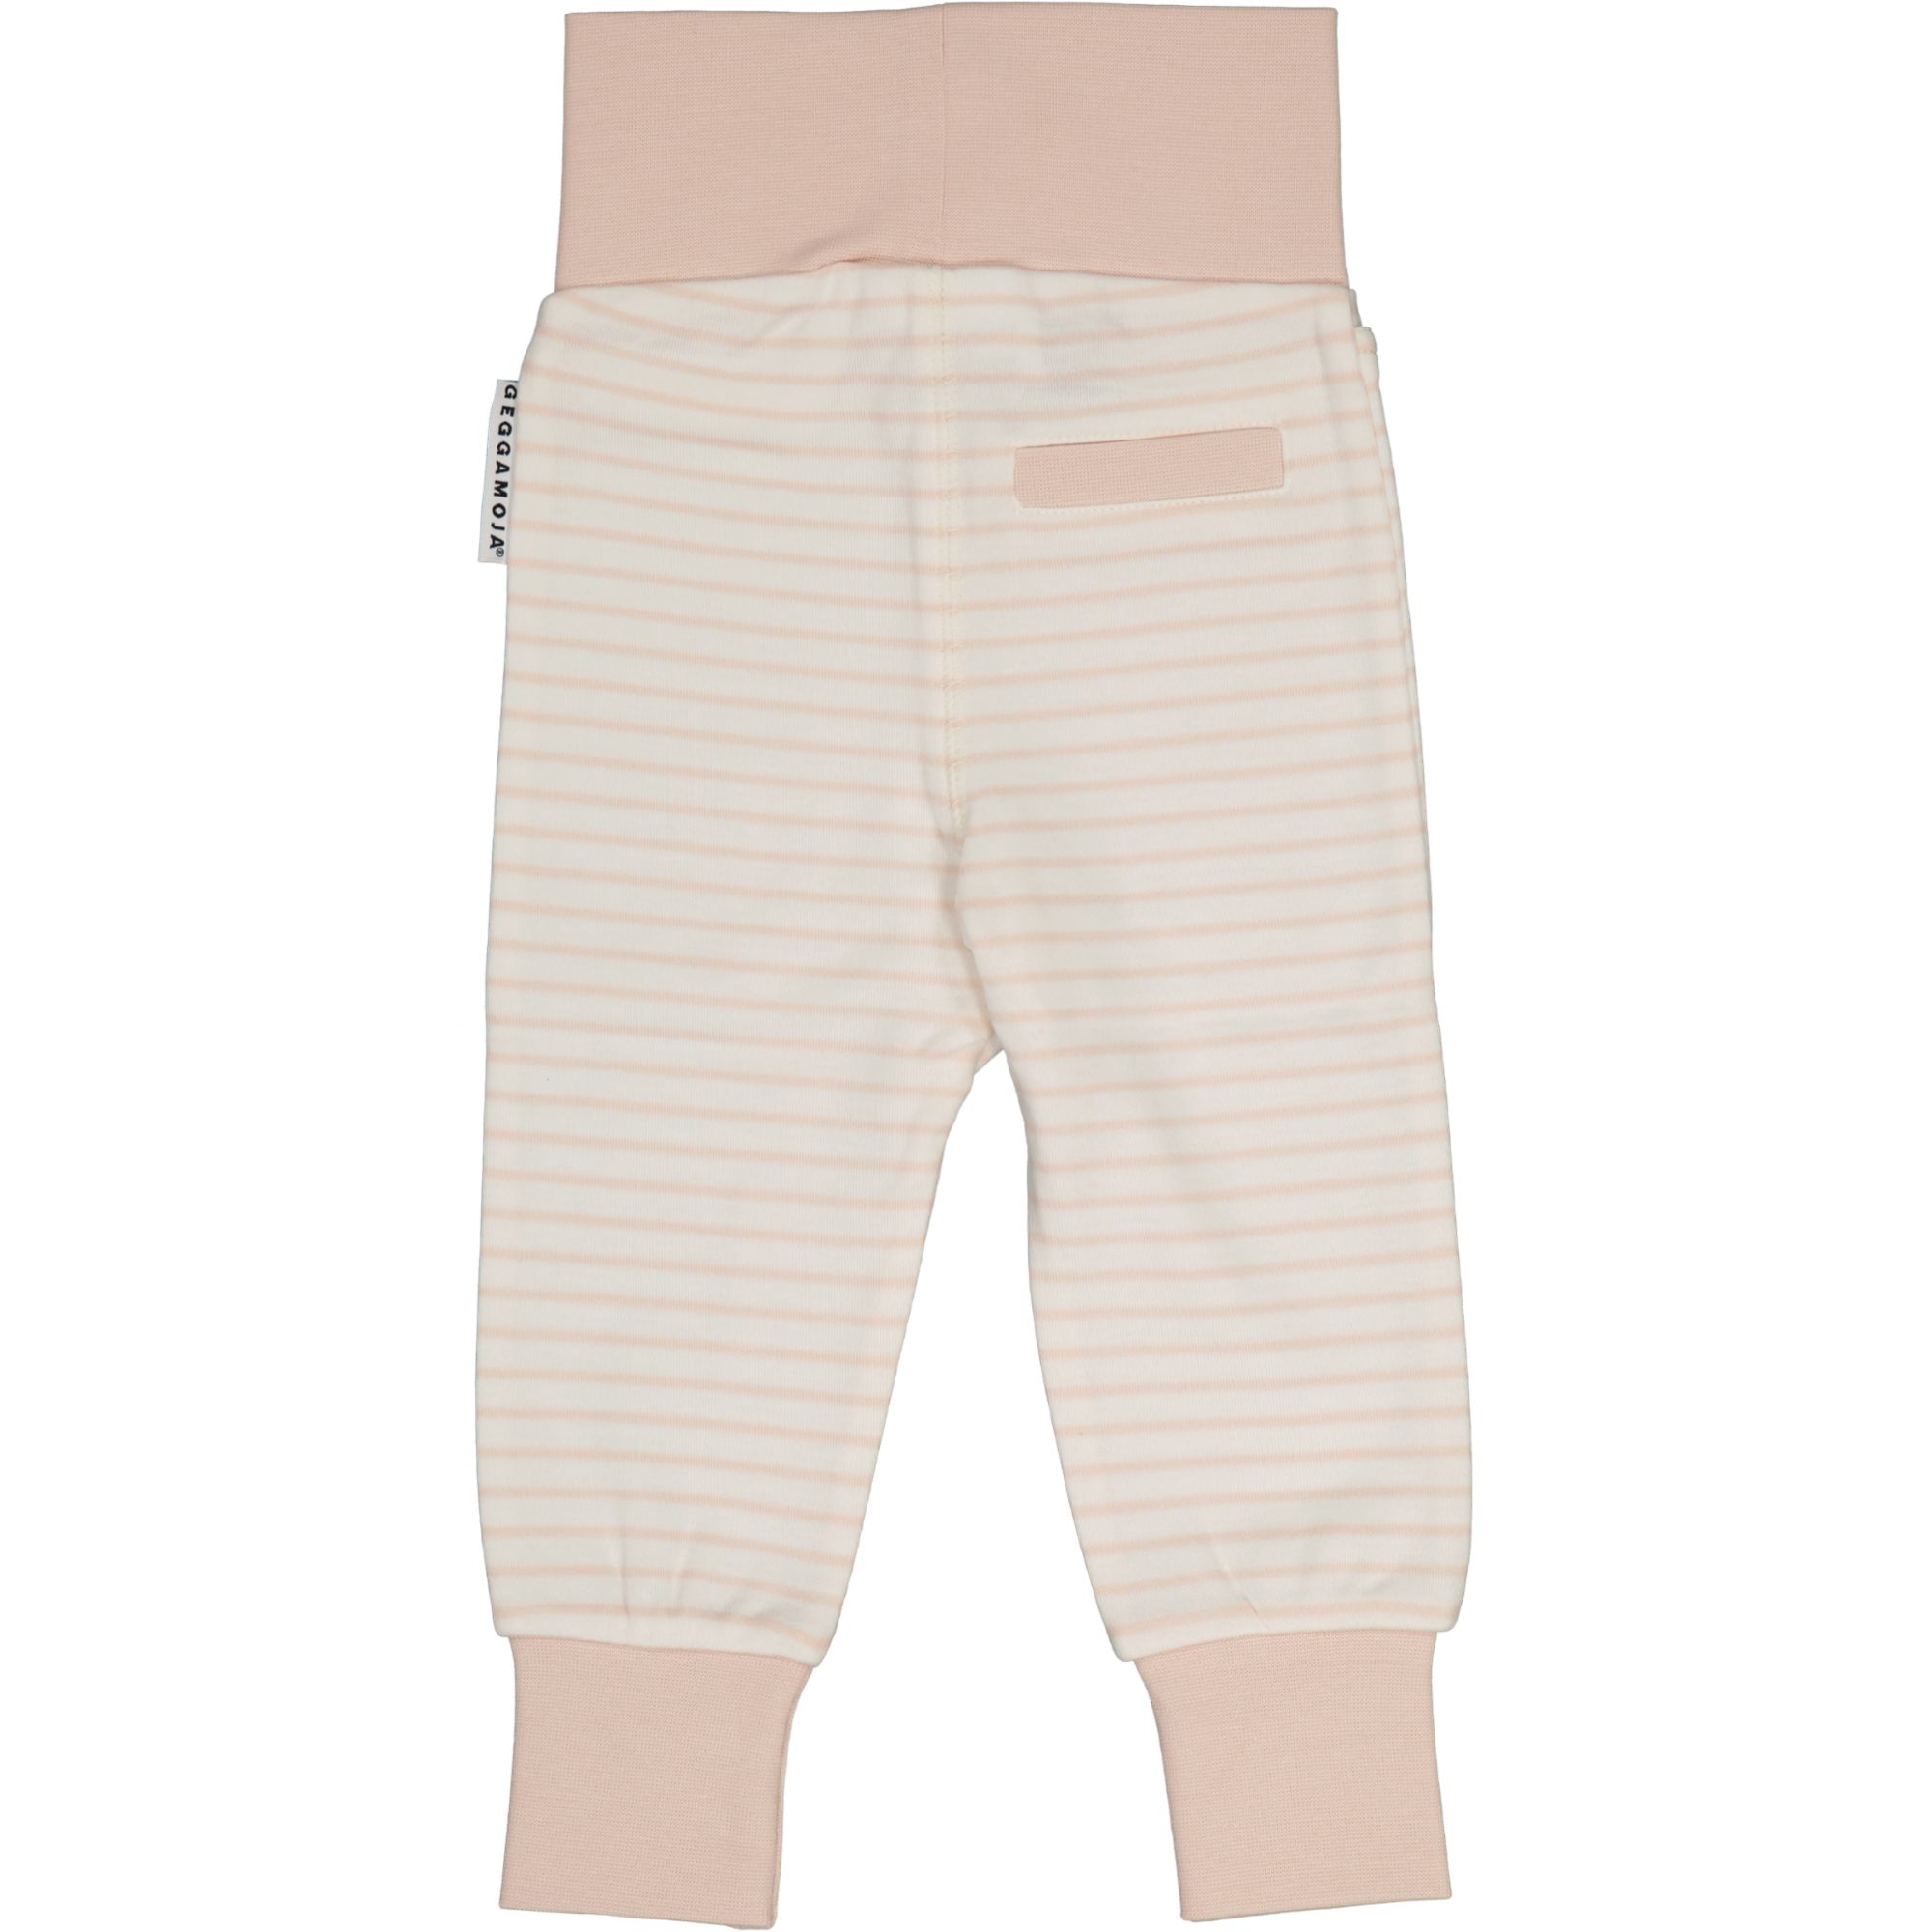 Baby trouser L.pink/offwhite